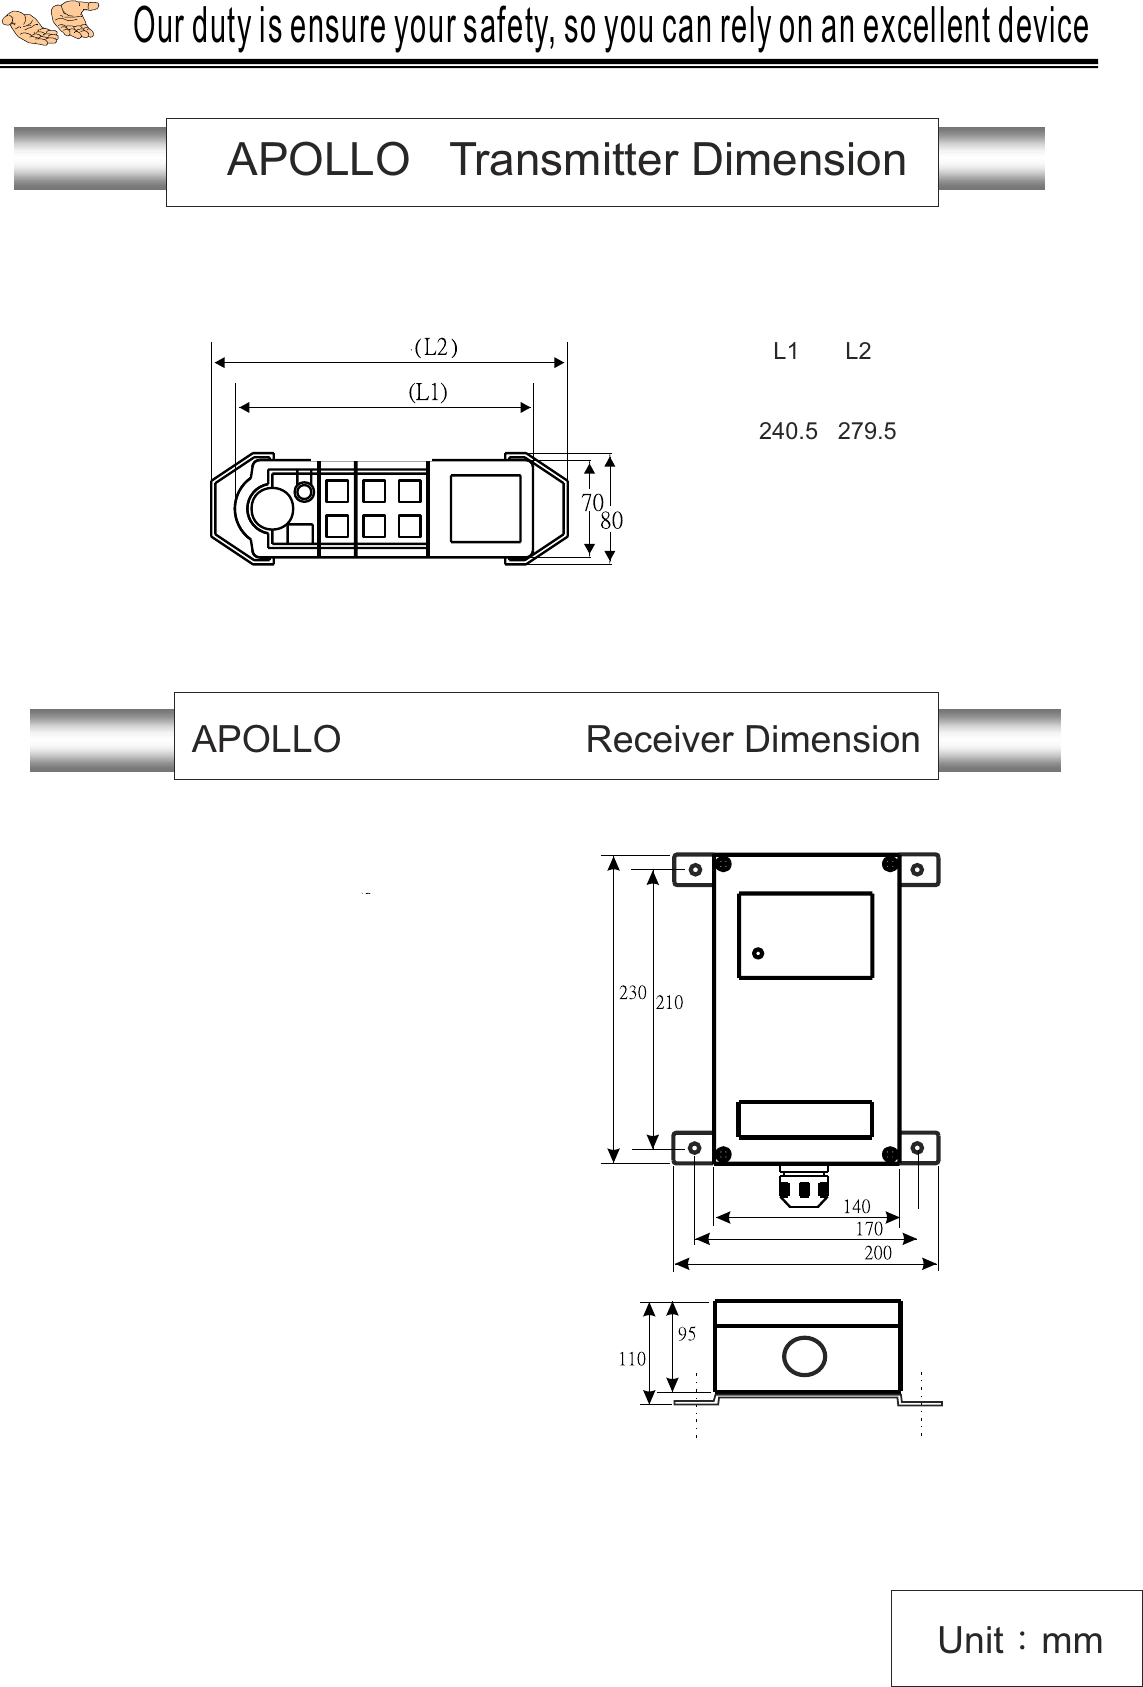 APOLLO   Transmitter Dimension               L1       L2  4PB    188.5   227.5  6PB    215      254  8PB    240.5   279.5  10PB    267      30612PB    292.5   331.52H 26.54H 5212 Our duty is ensure your safety, so you can rely on an excellent device  IP65Unit mmAPOLLO Box.1/Box.2   Receiver DimensionBox.1 For :P700,C1-4PB,C1-6PB,C1-8PB,C2-4PB, C211Box.2 For: C1-10PB,C1-12PB,C2-6PB,C2-8PB,C2-10PB,C2-12PB                  Box.1: IP65Box.2: IP6713Box.1 Box.2